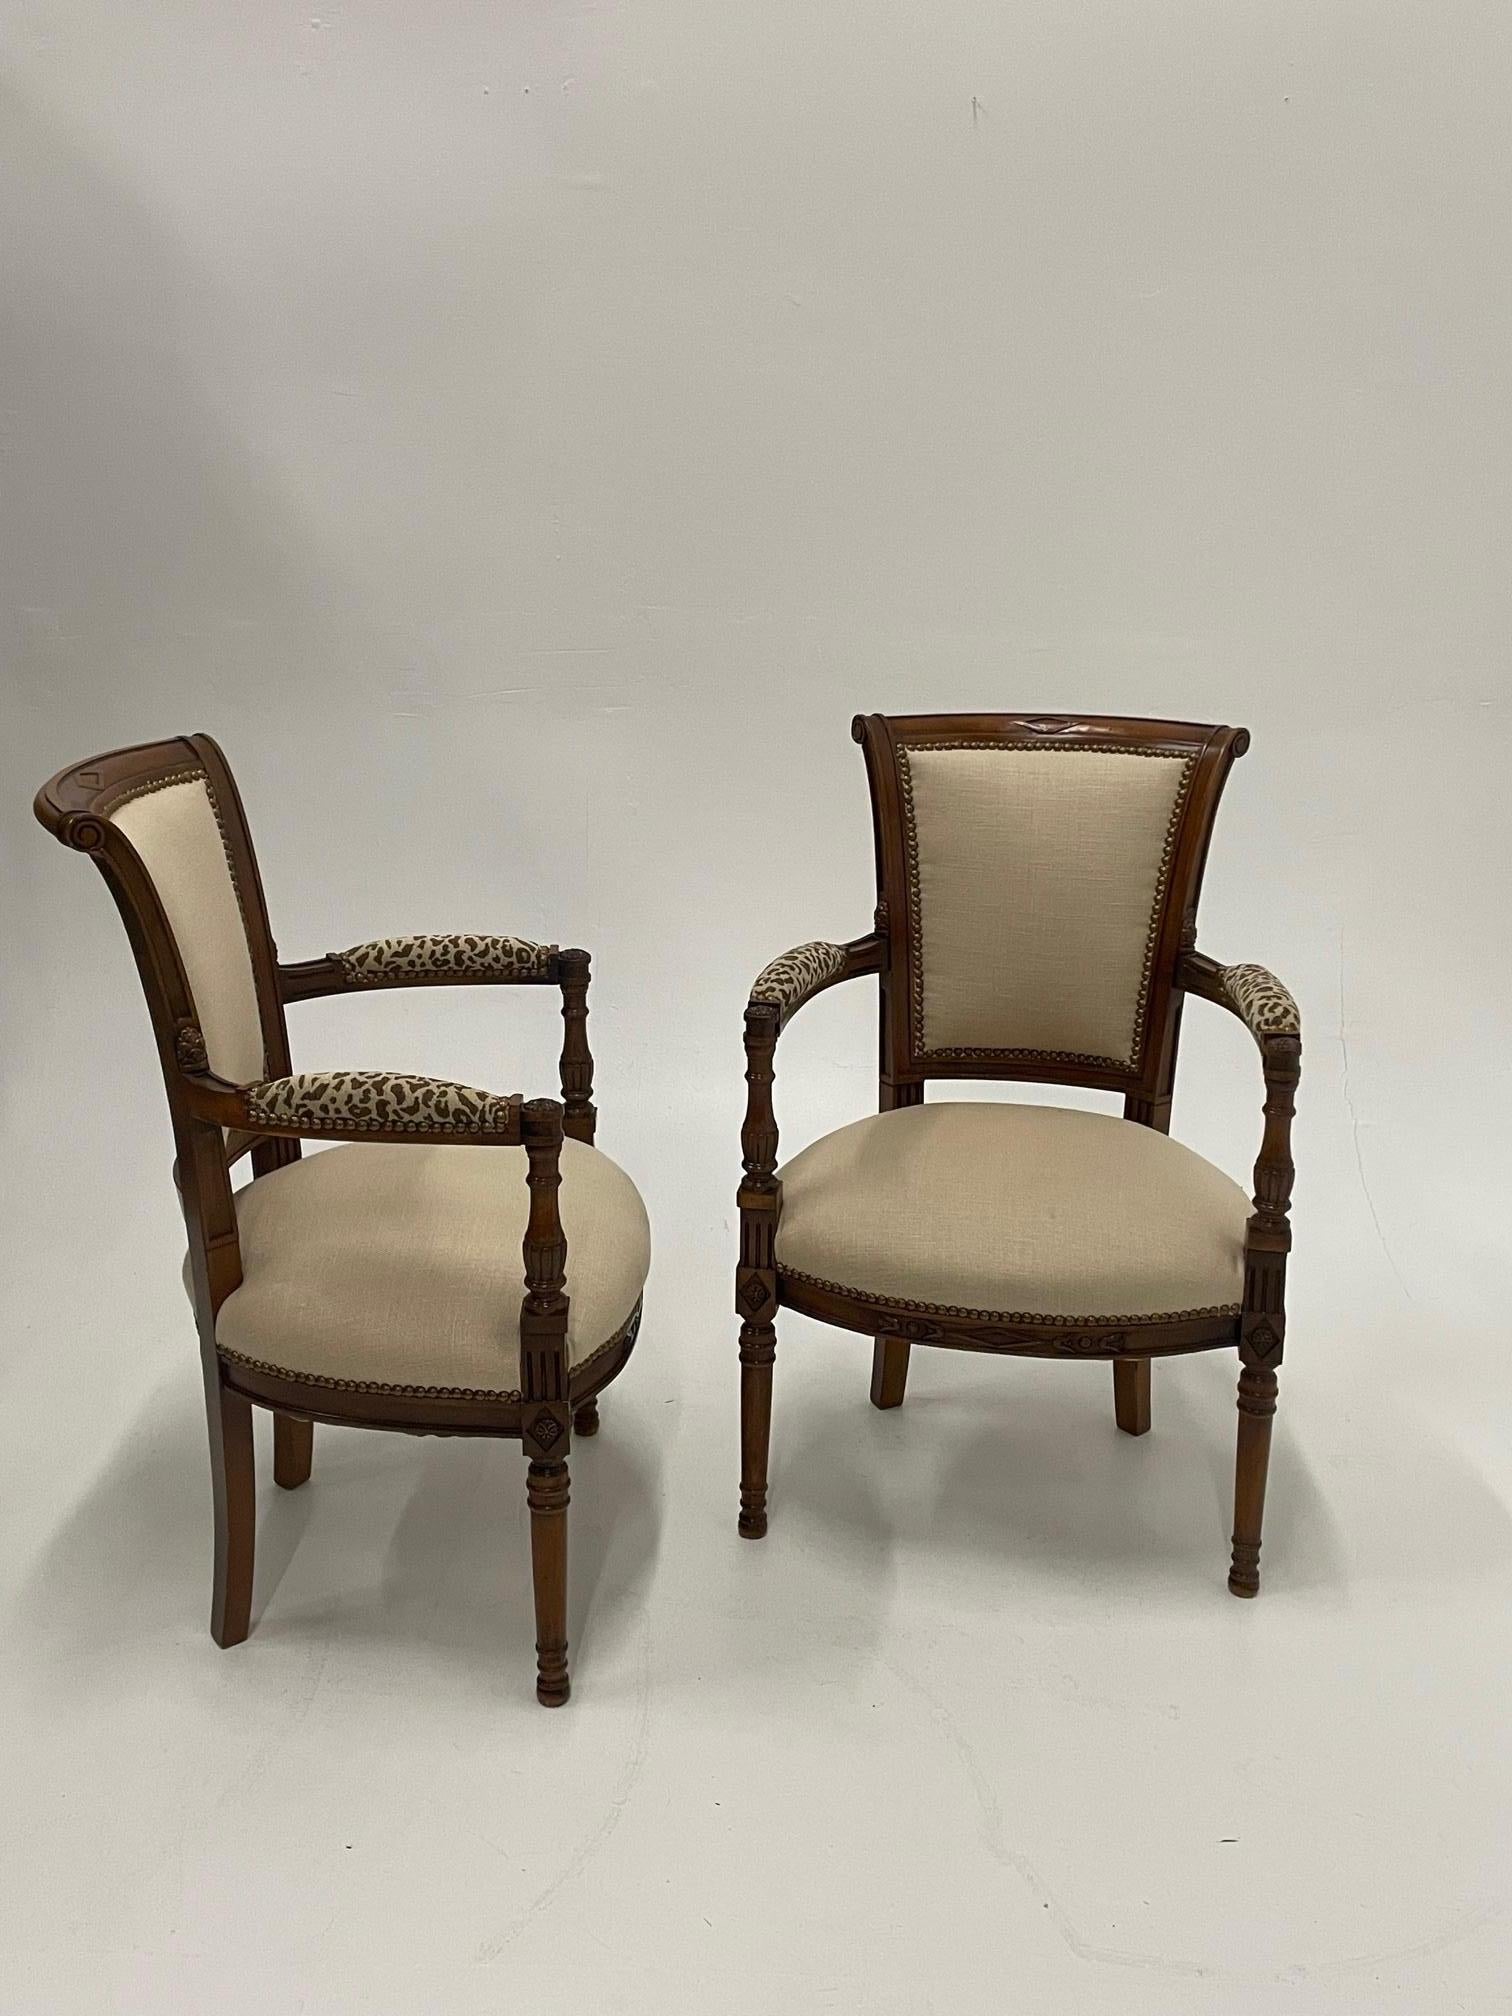 Superbly Stylish Pair of Carved Walnut Armchairs Upholstered in Linen & Leopard For Sale 4